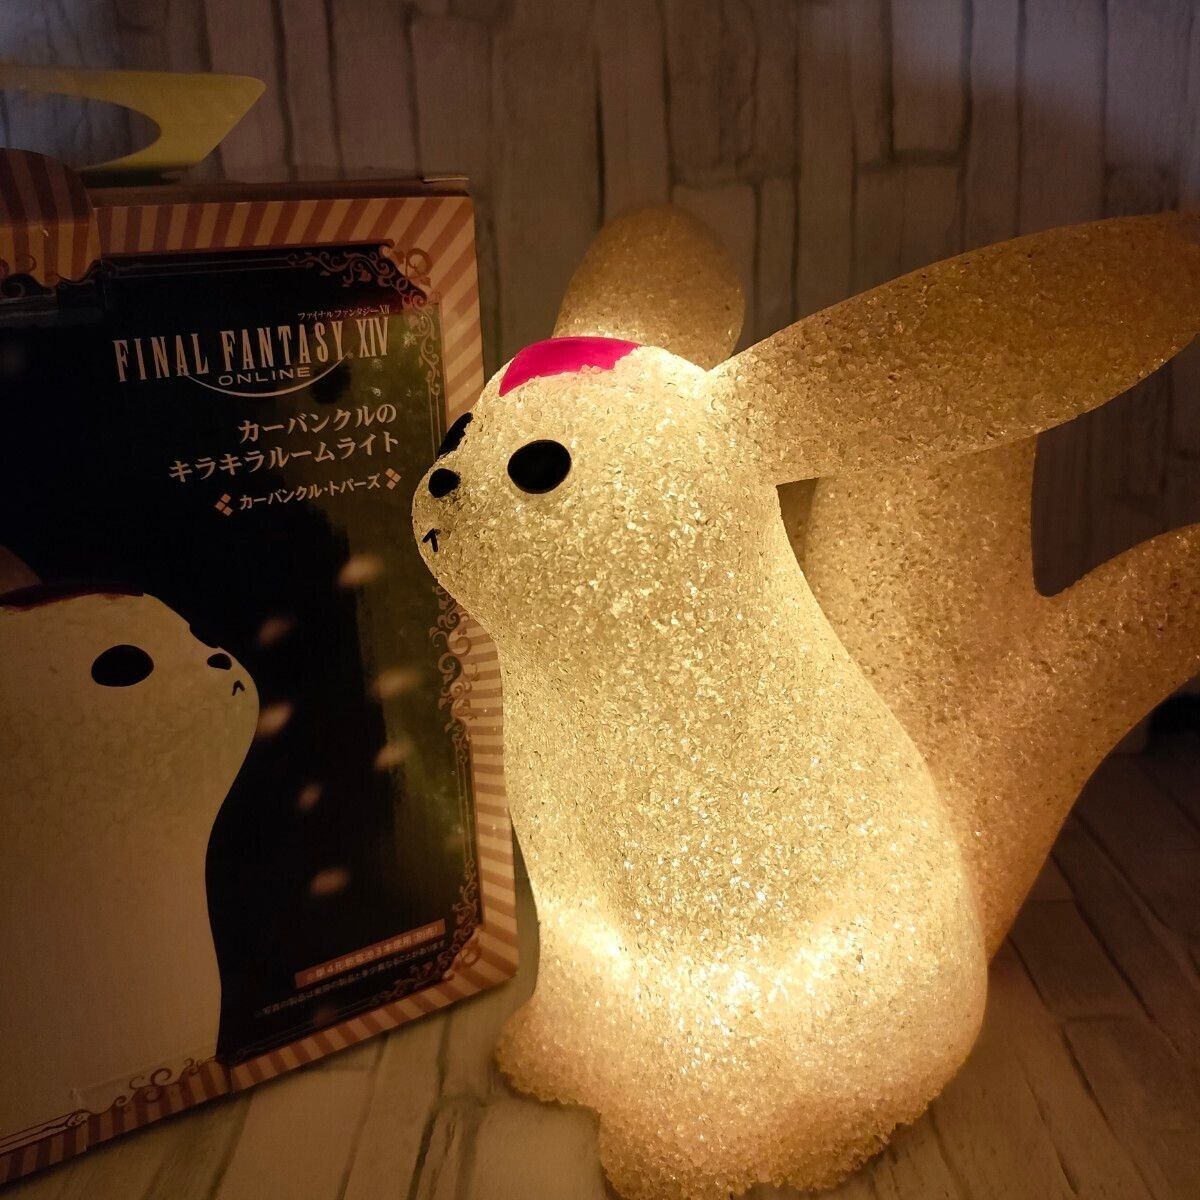 Final Fantasy XIV Online FF14 Topaz Carbuncle Room light Prize Yellow Cute TAITO